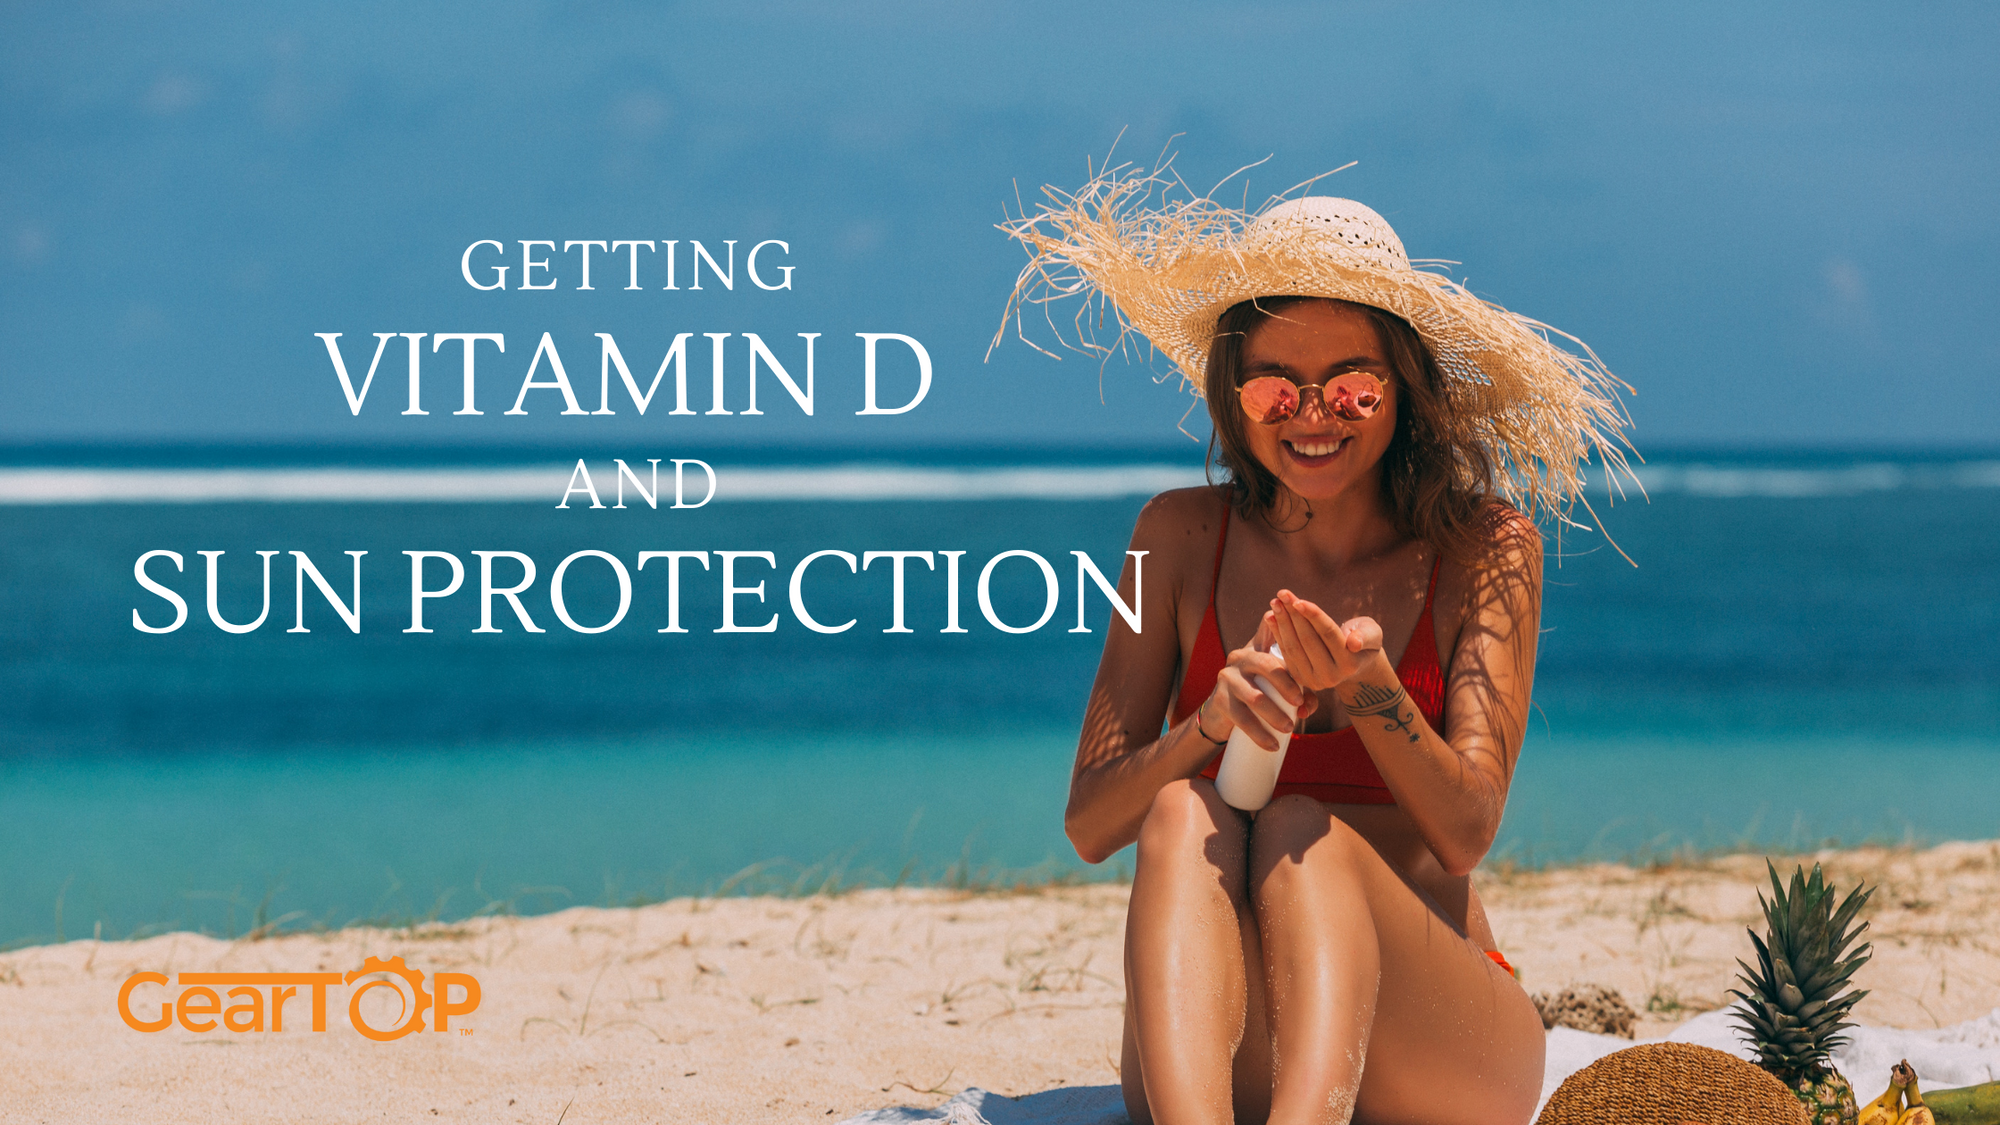 Getting vitamin D benefits from the sun